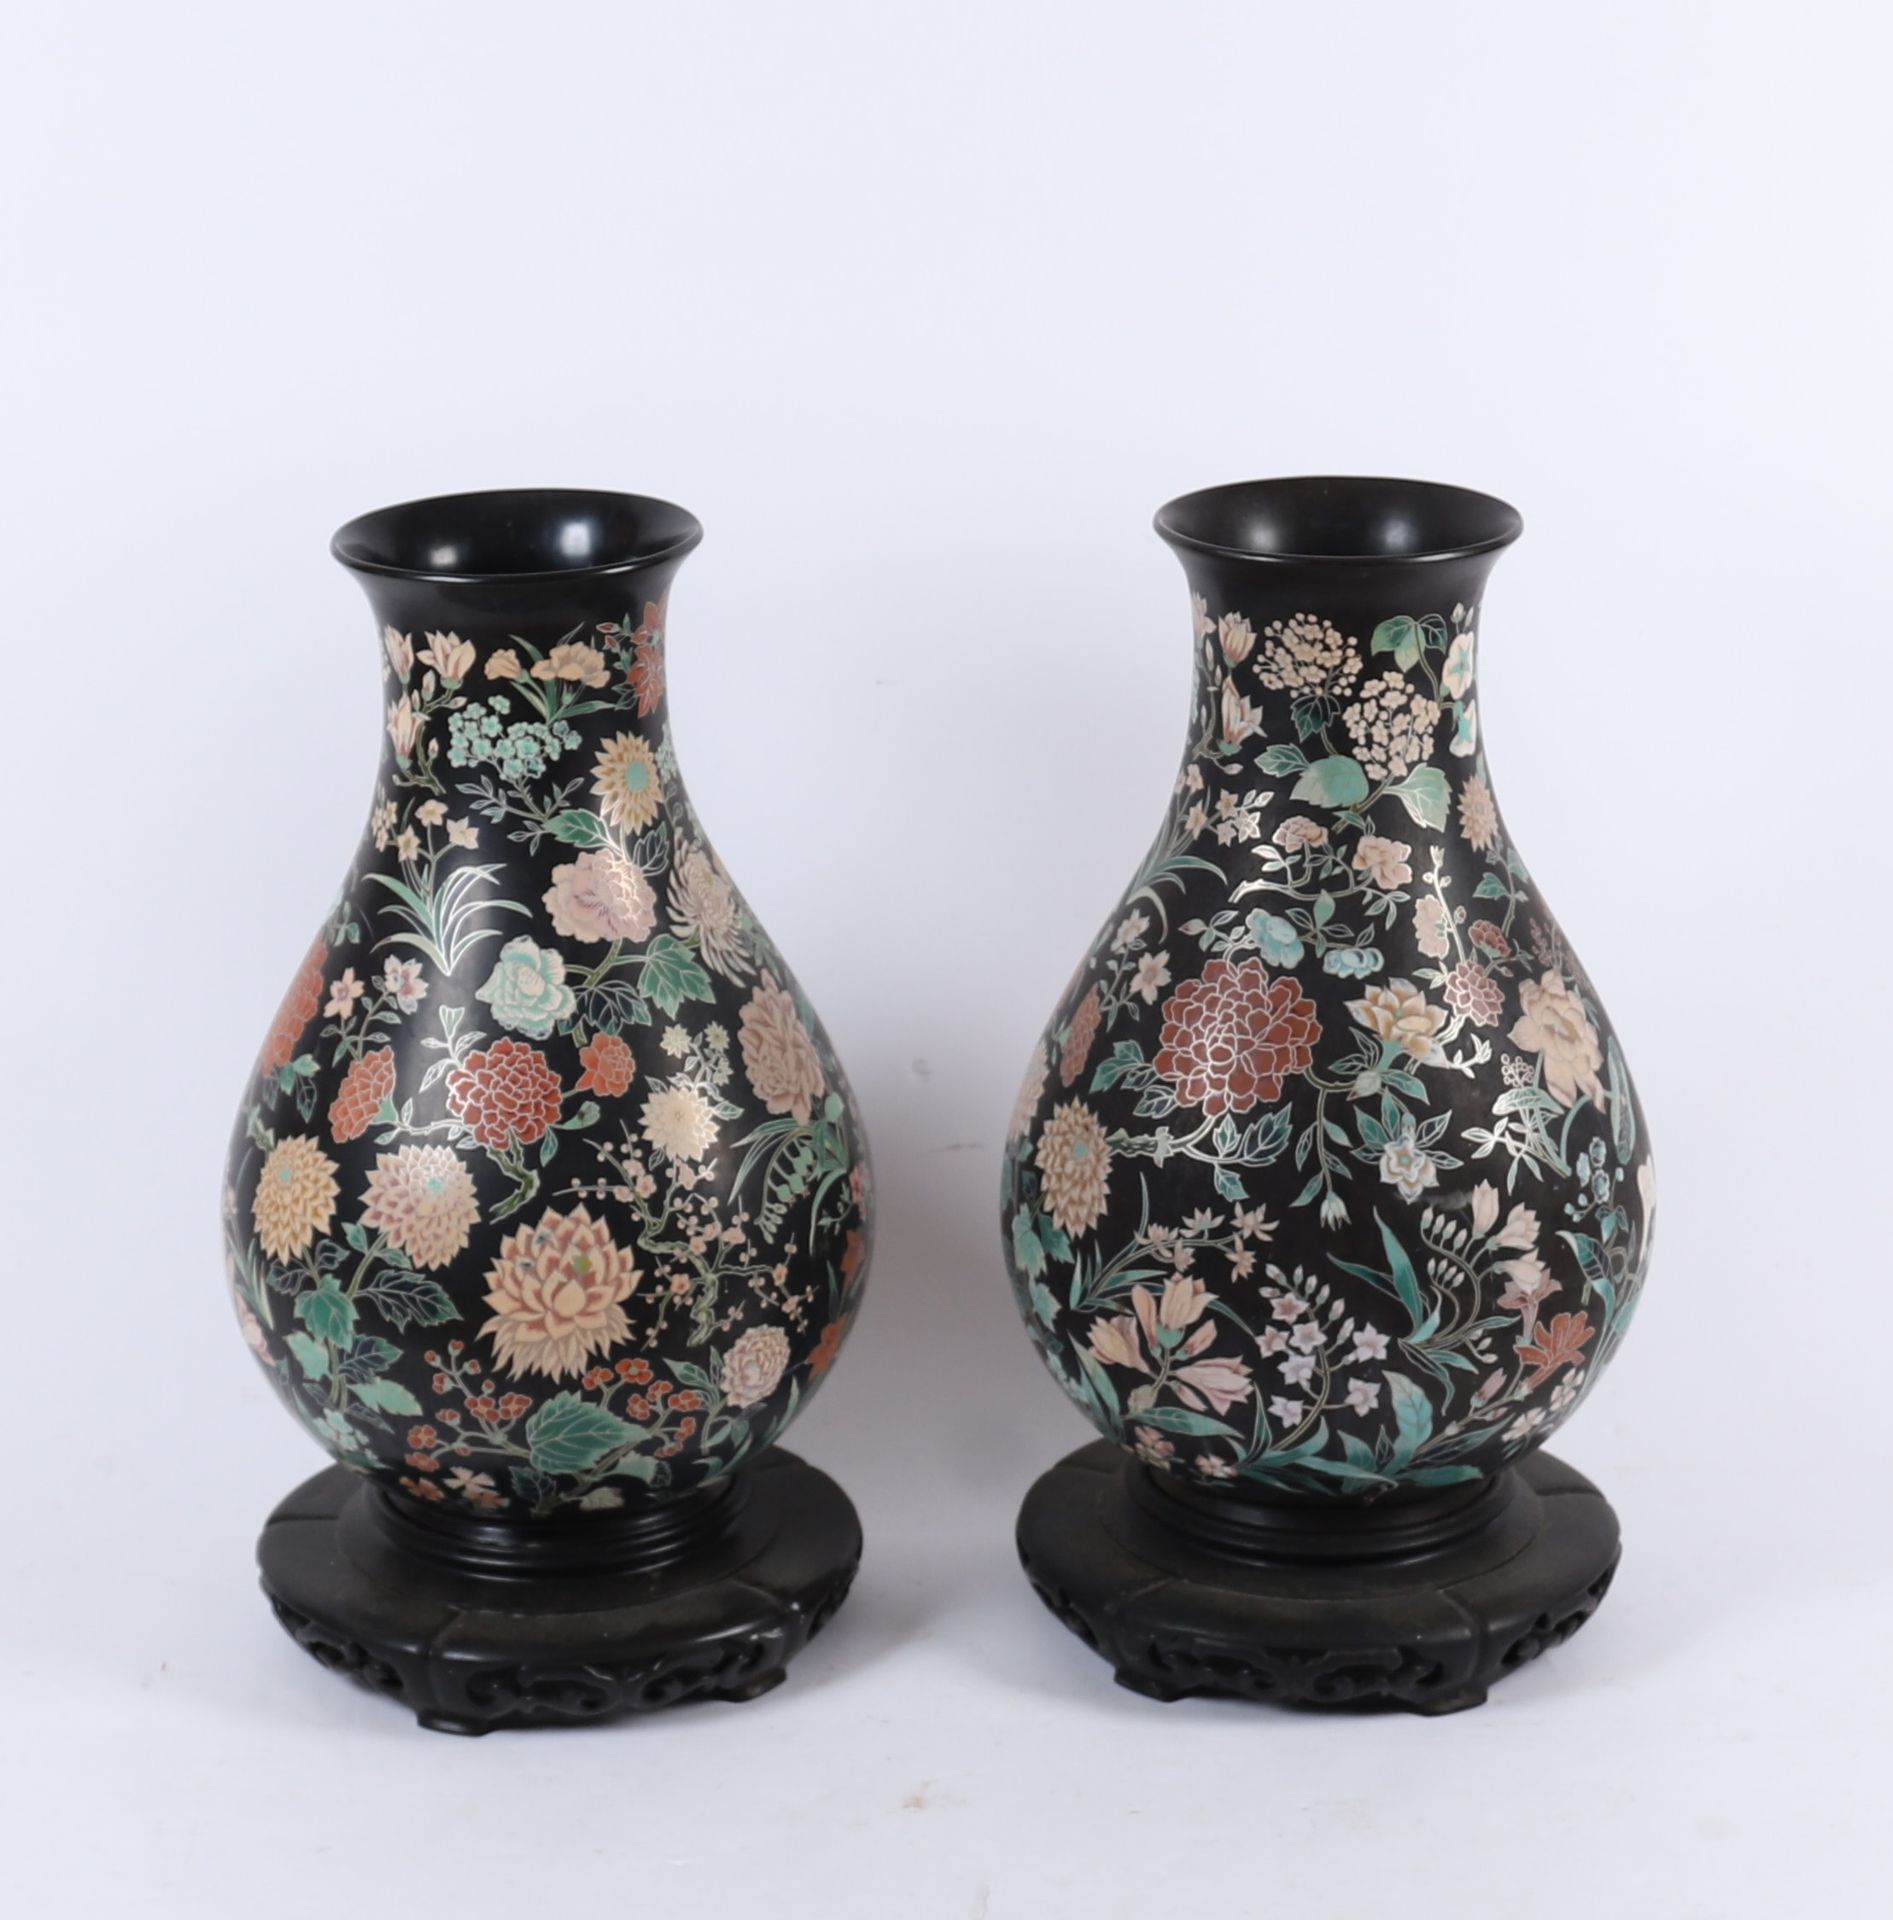 Null PAIR OF LARGE BALUSTER VASES IN ASIAN LACQUERED WOOD
Polychrome rotating de&hellip;